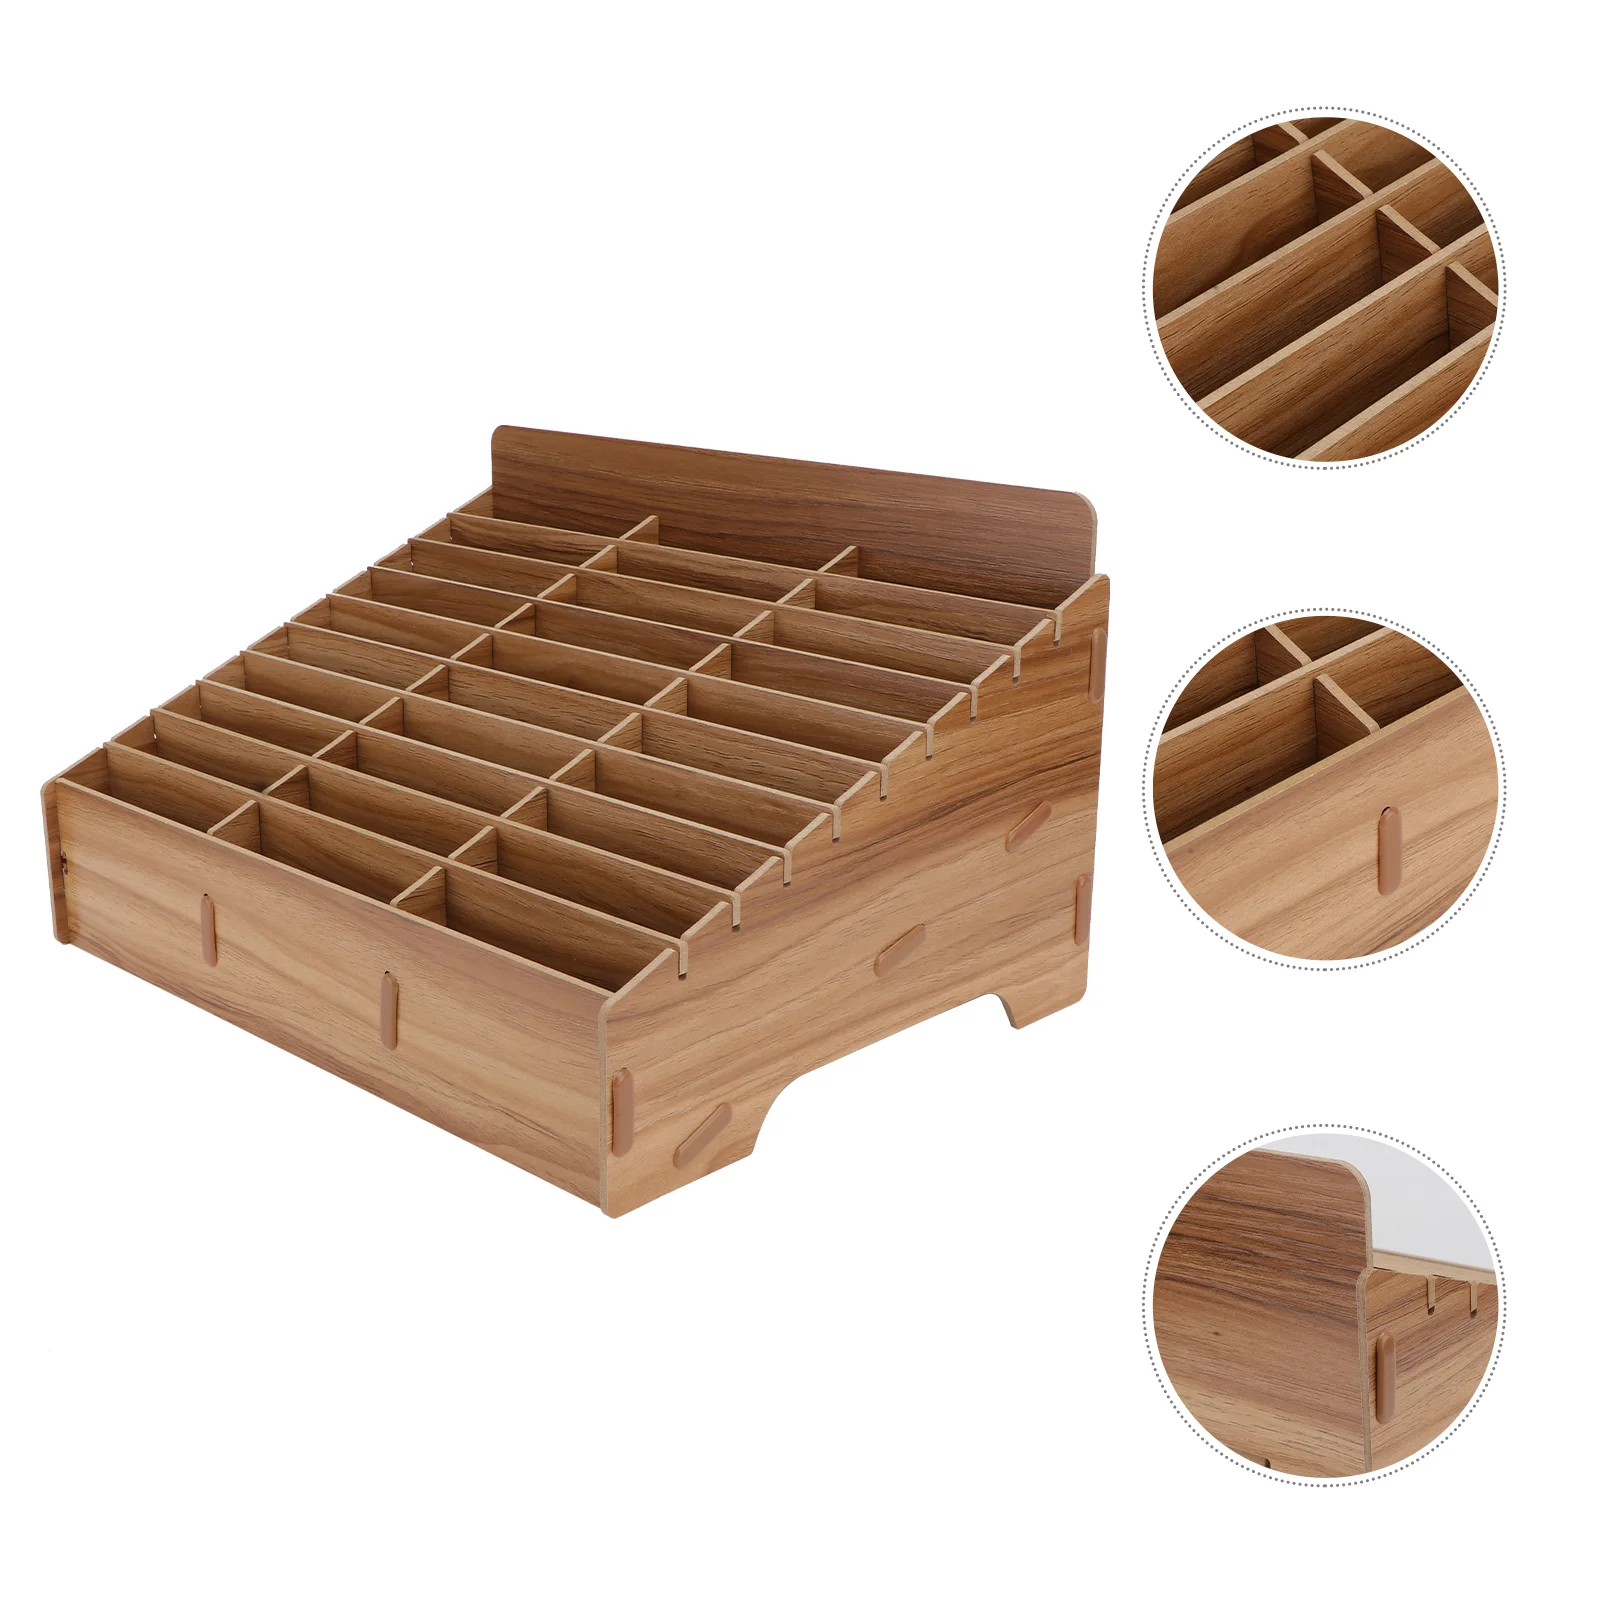 

Classroom Phone Finishing Box Mobile Phone Cell Phone Management Box Wooden Multi-grid Phone Storage Box (30 Grids)